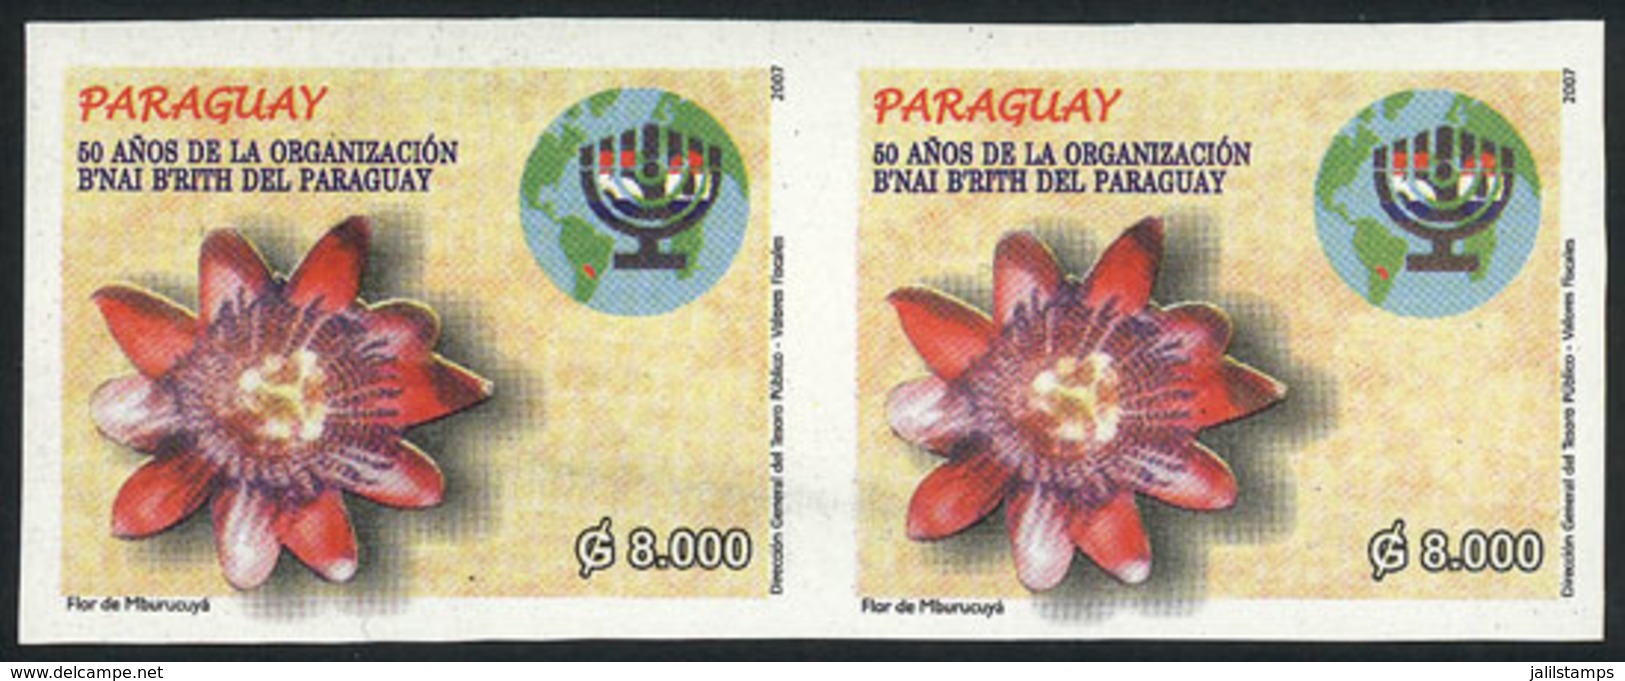 PARAGUAY: Sc.2824, 2007 Orchid, Map, Judaica, IMPERFORATE PAIR, Excellent Quality! - Paraguay